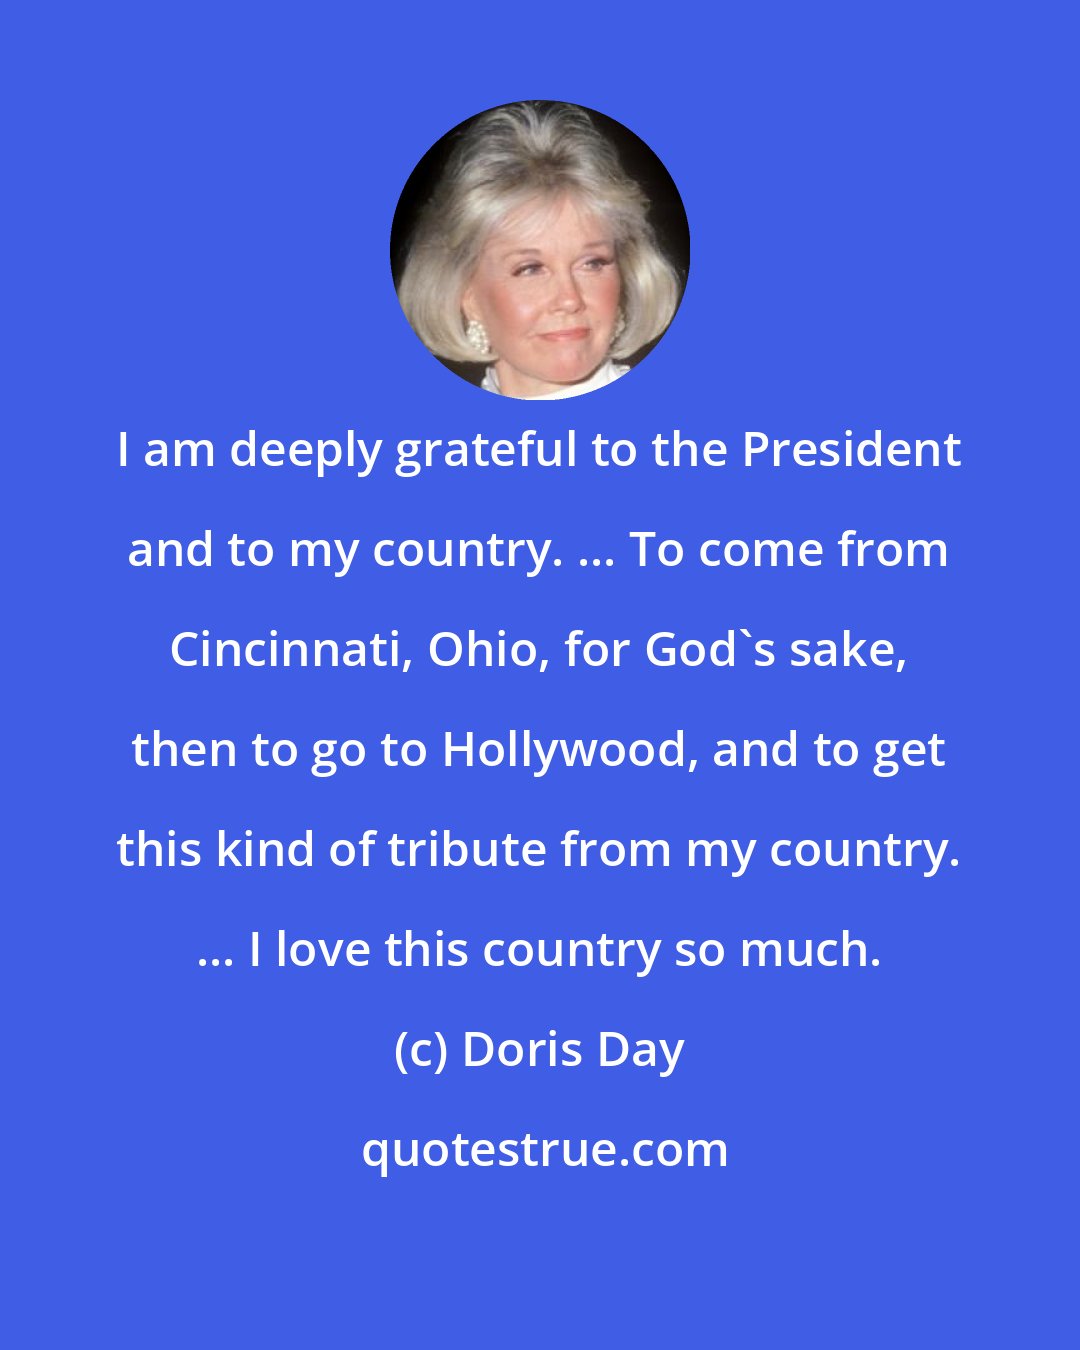 Doris Day: I am deeply grateful to the President and to my country. ... To come from Cincinnati, Ohio, for God's sake, then to go to Hollywood, and to get this kind of tribute from my country. ... I love this country so much.